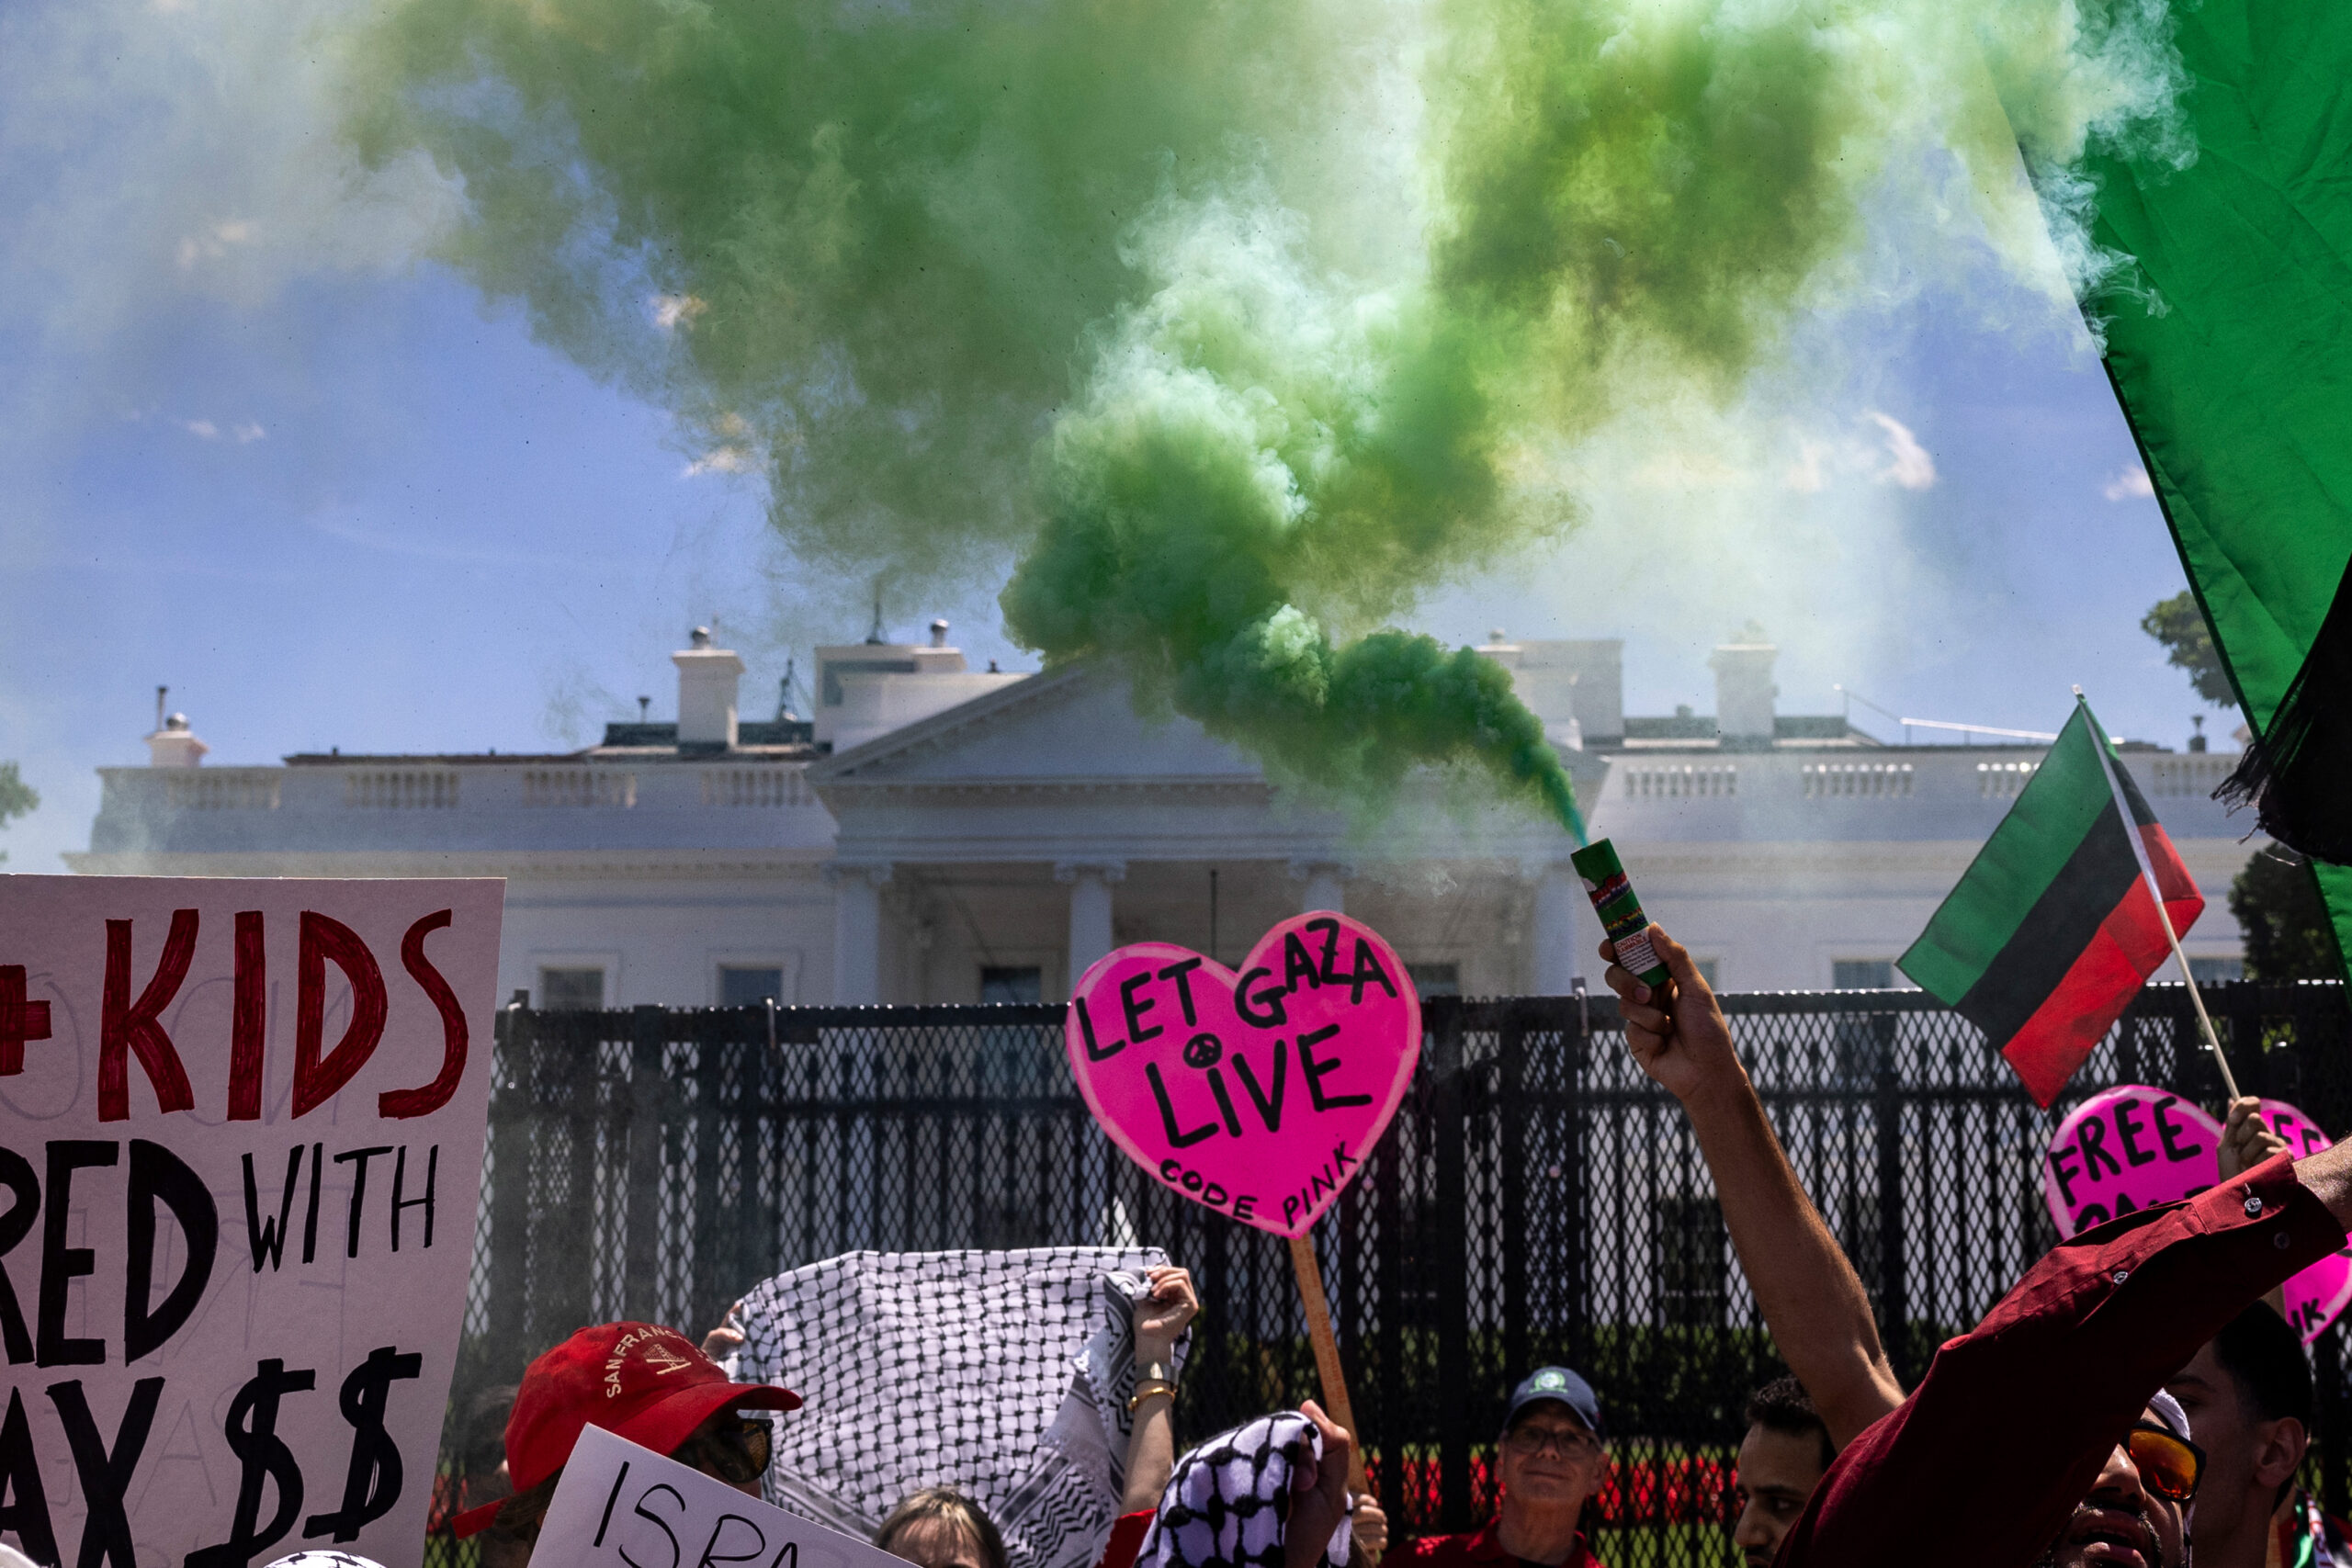 9 Things I Saw at the Pro-Hamas White House Rally